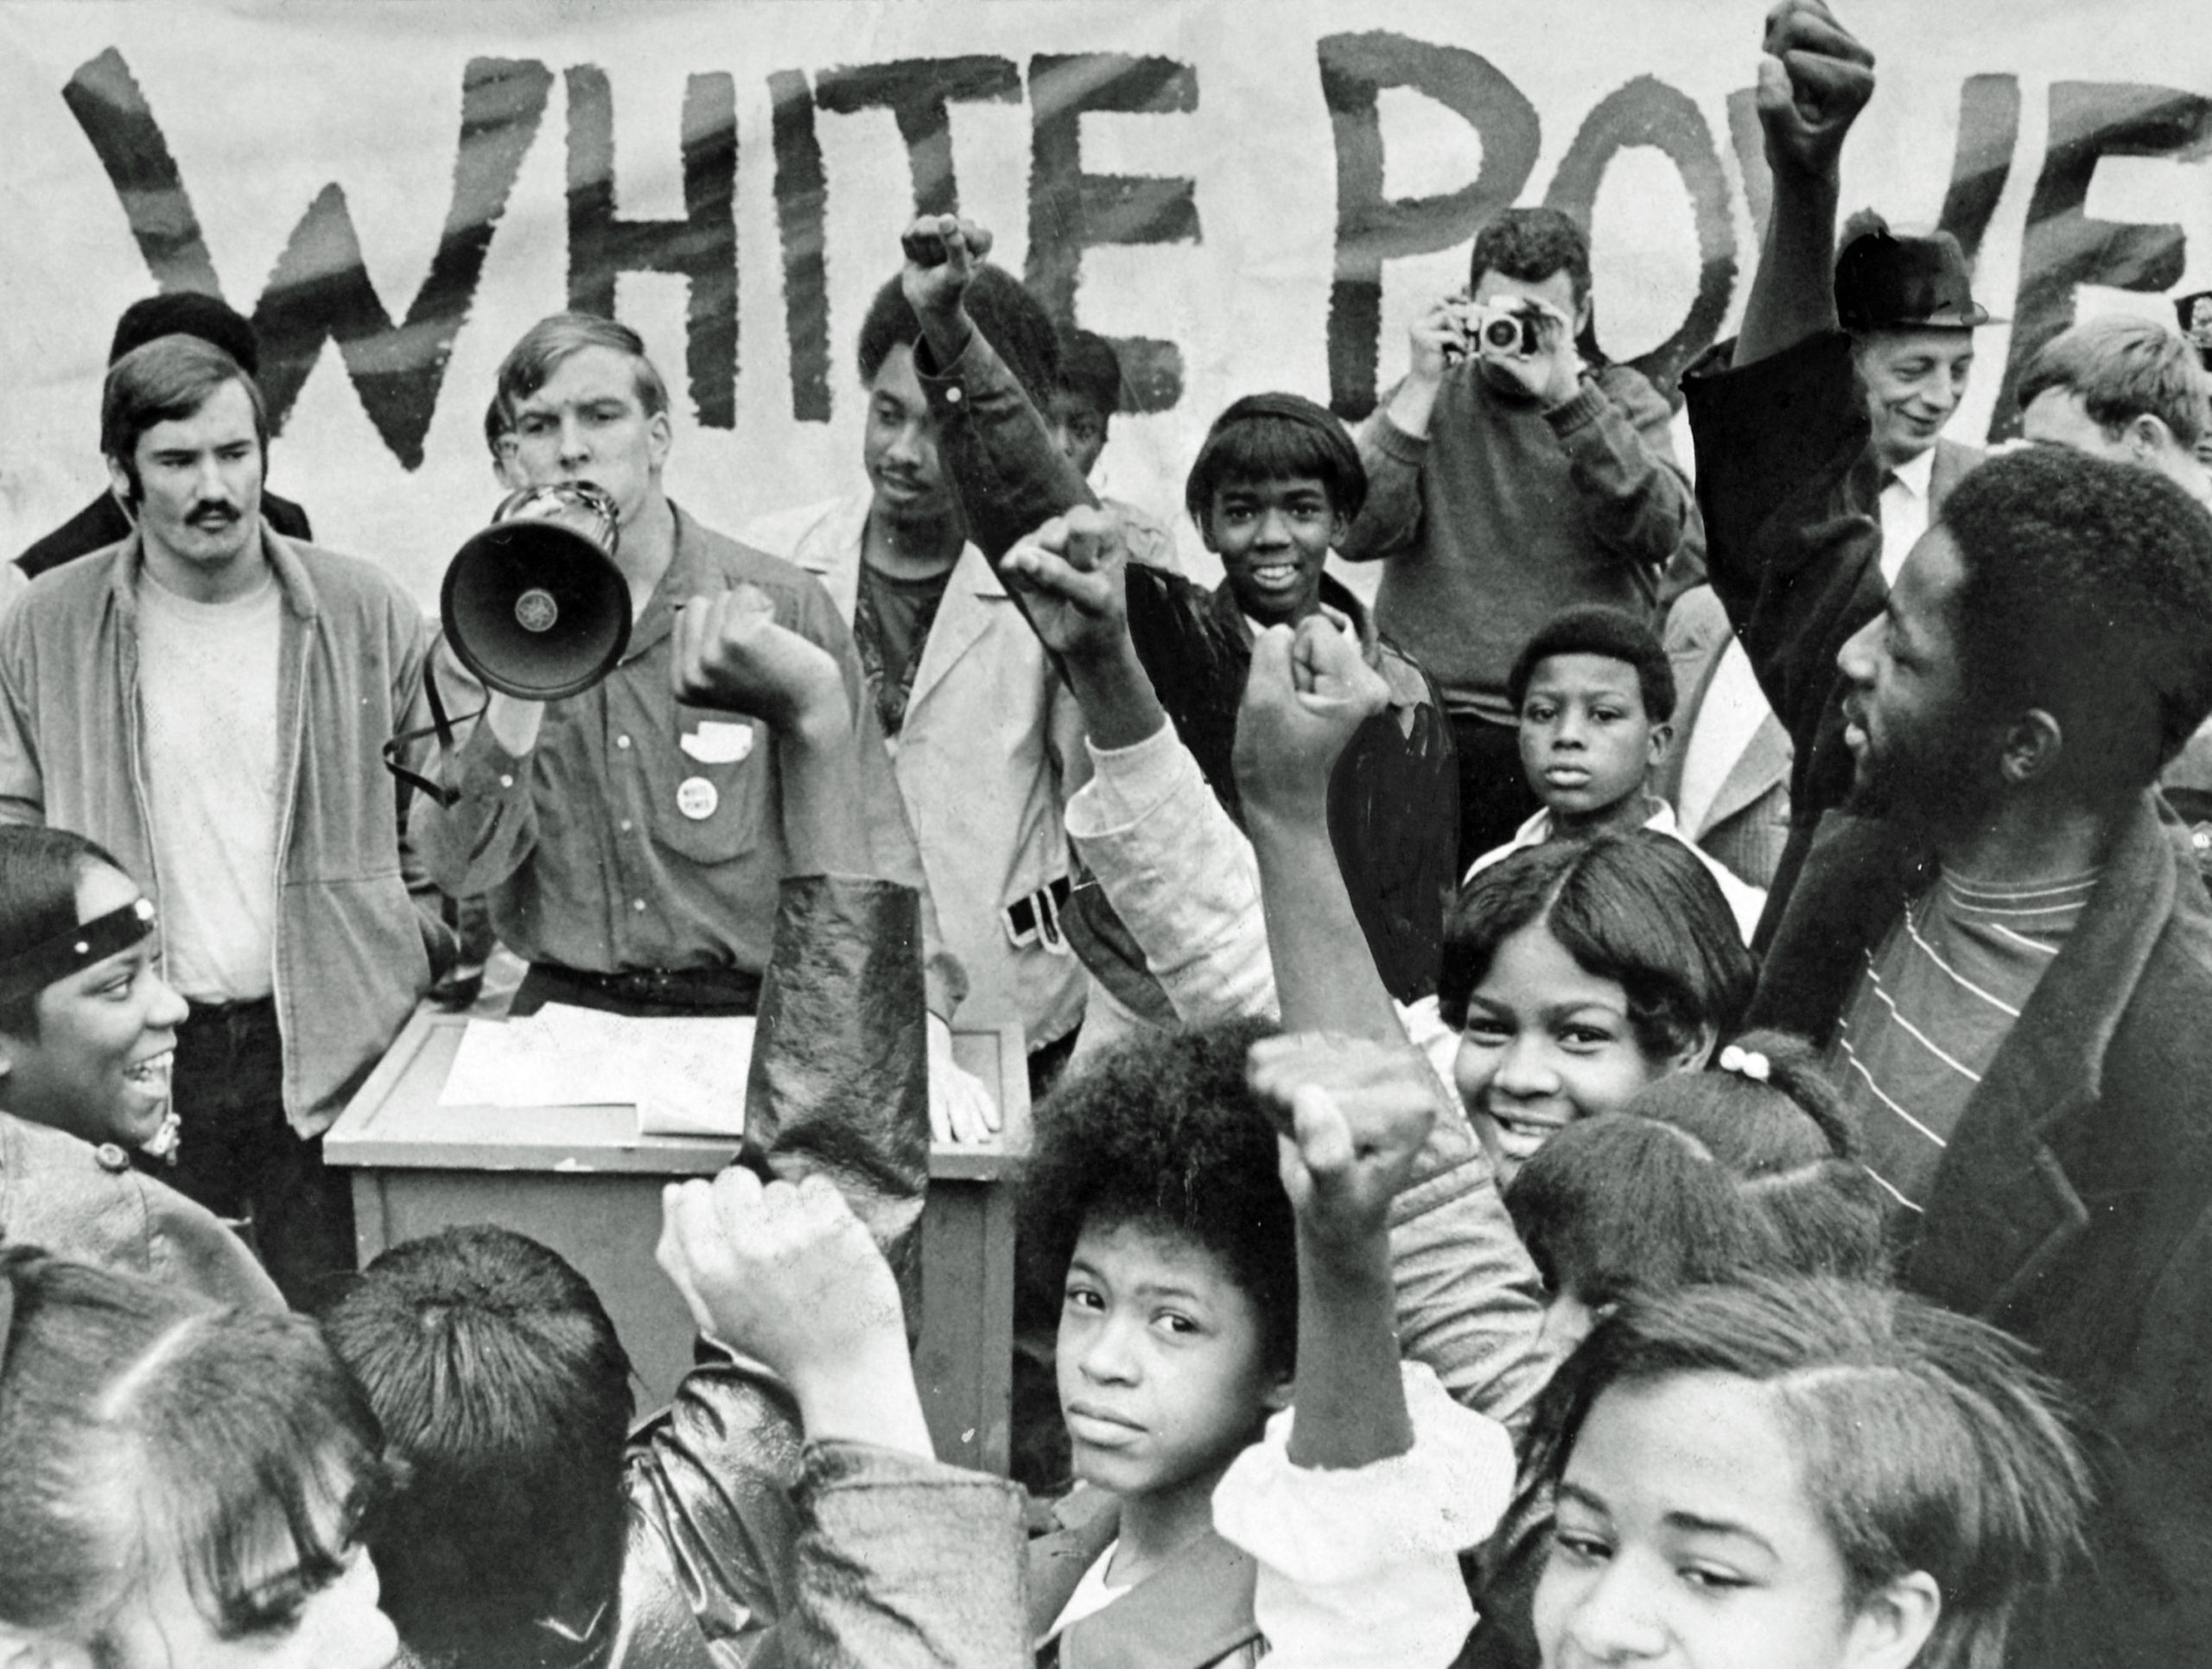 More than a hundred Black high school students, supported by several dozen white students, took over a National Socialist White People’s Party rally in Alexandria on November 15, 1970. DC Public Library, Star Collection © Washington Post.